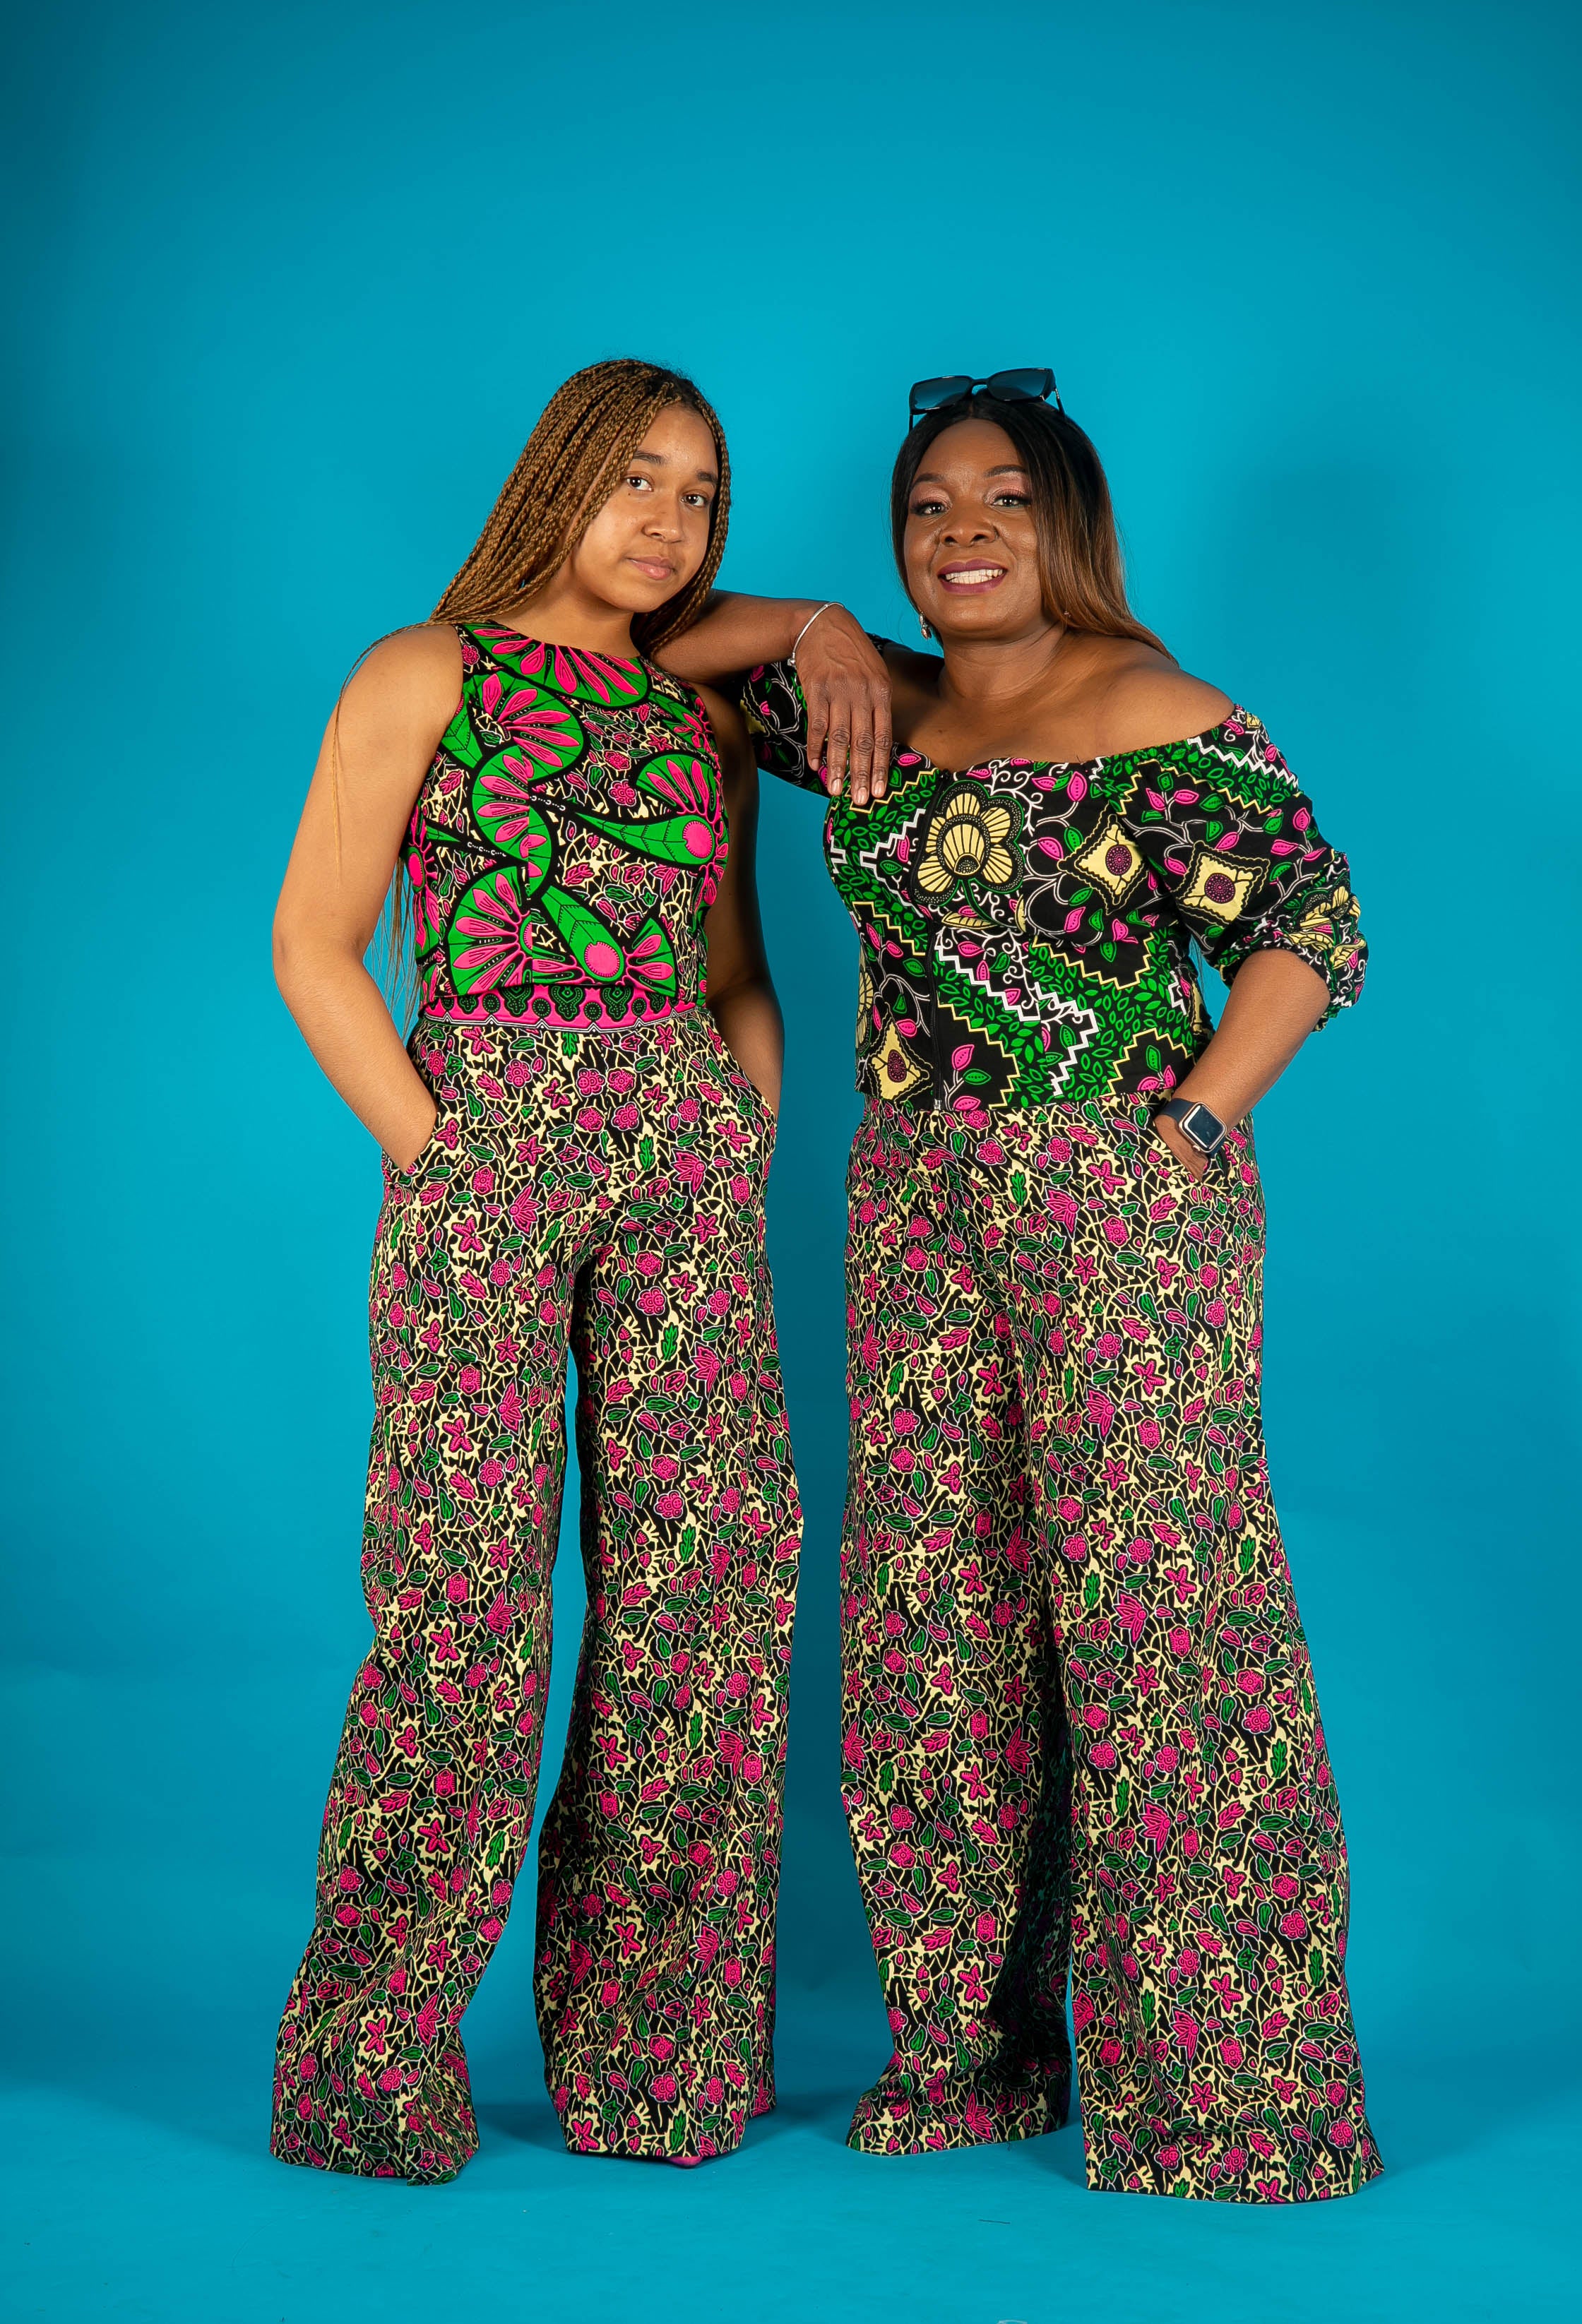 temad collections african print ankara pink barbie crop top, Stylish African print blouses and tops, African print Ankara fabric, African blouses, African tops, African print casual tops, African tops for ladies, African peplum top, African tops with sleeves, African bustier, African corset, African crop top, African wrap top, Ankara wrap top, Ankara long top, Ankara off shoulder top, Ankara blouse with jeans